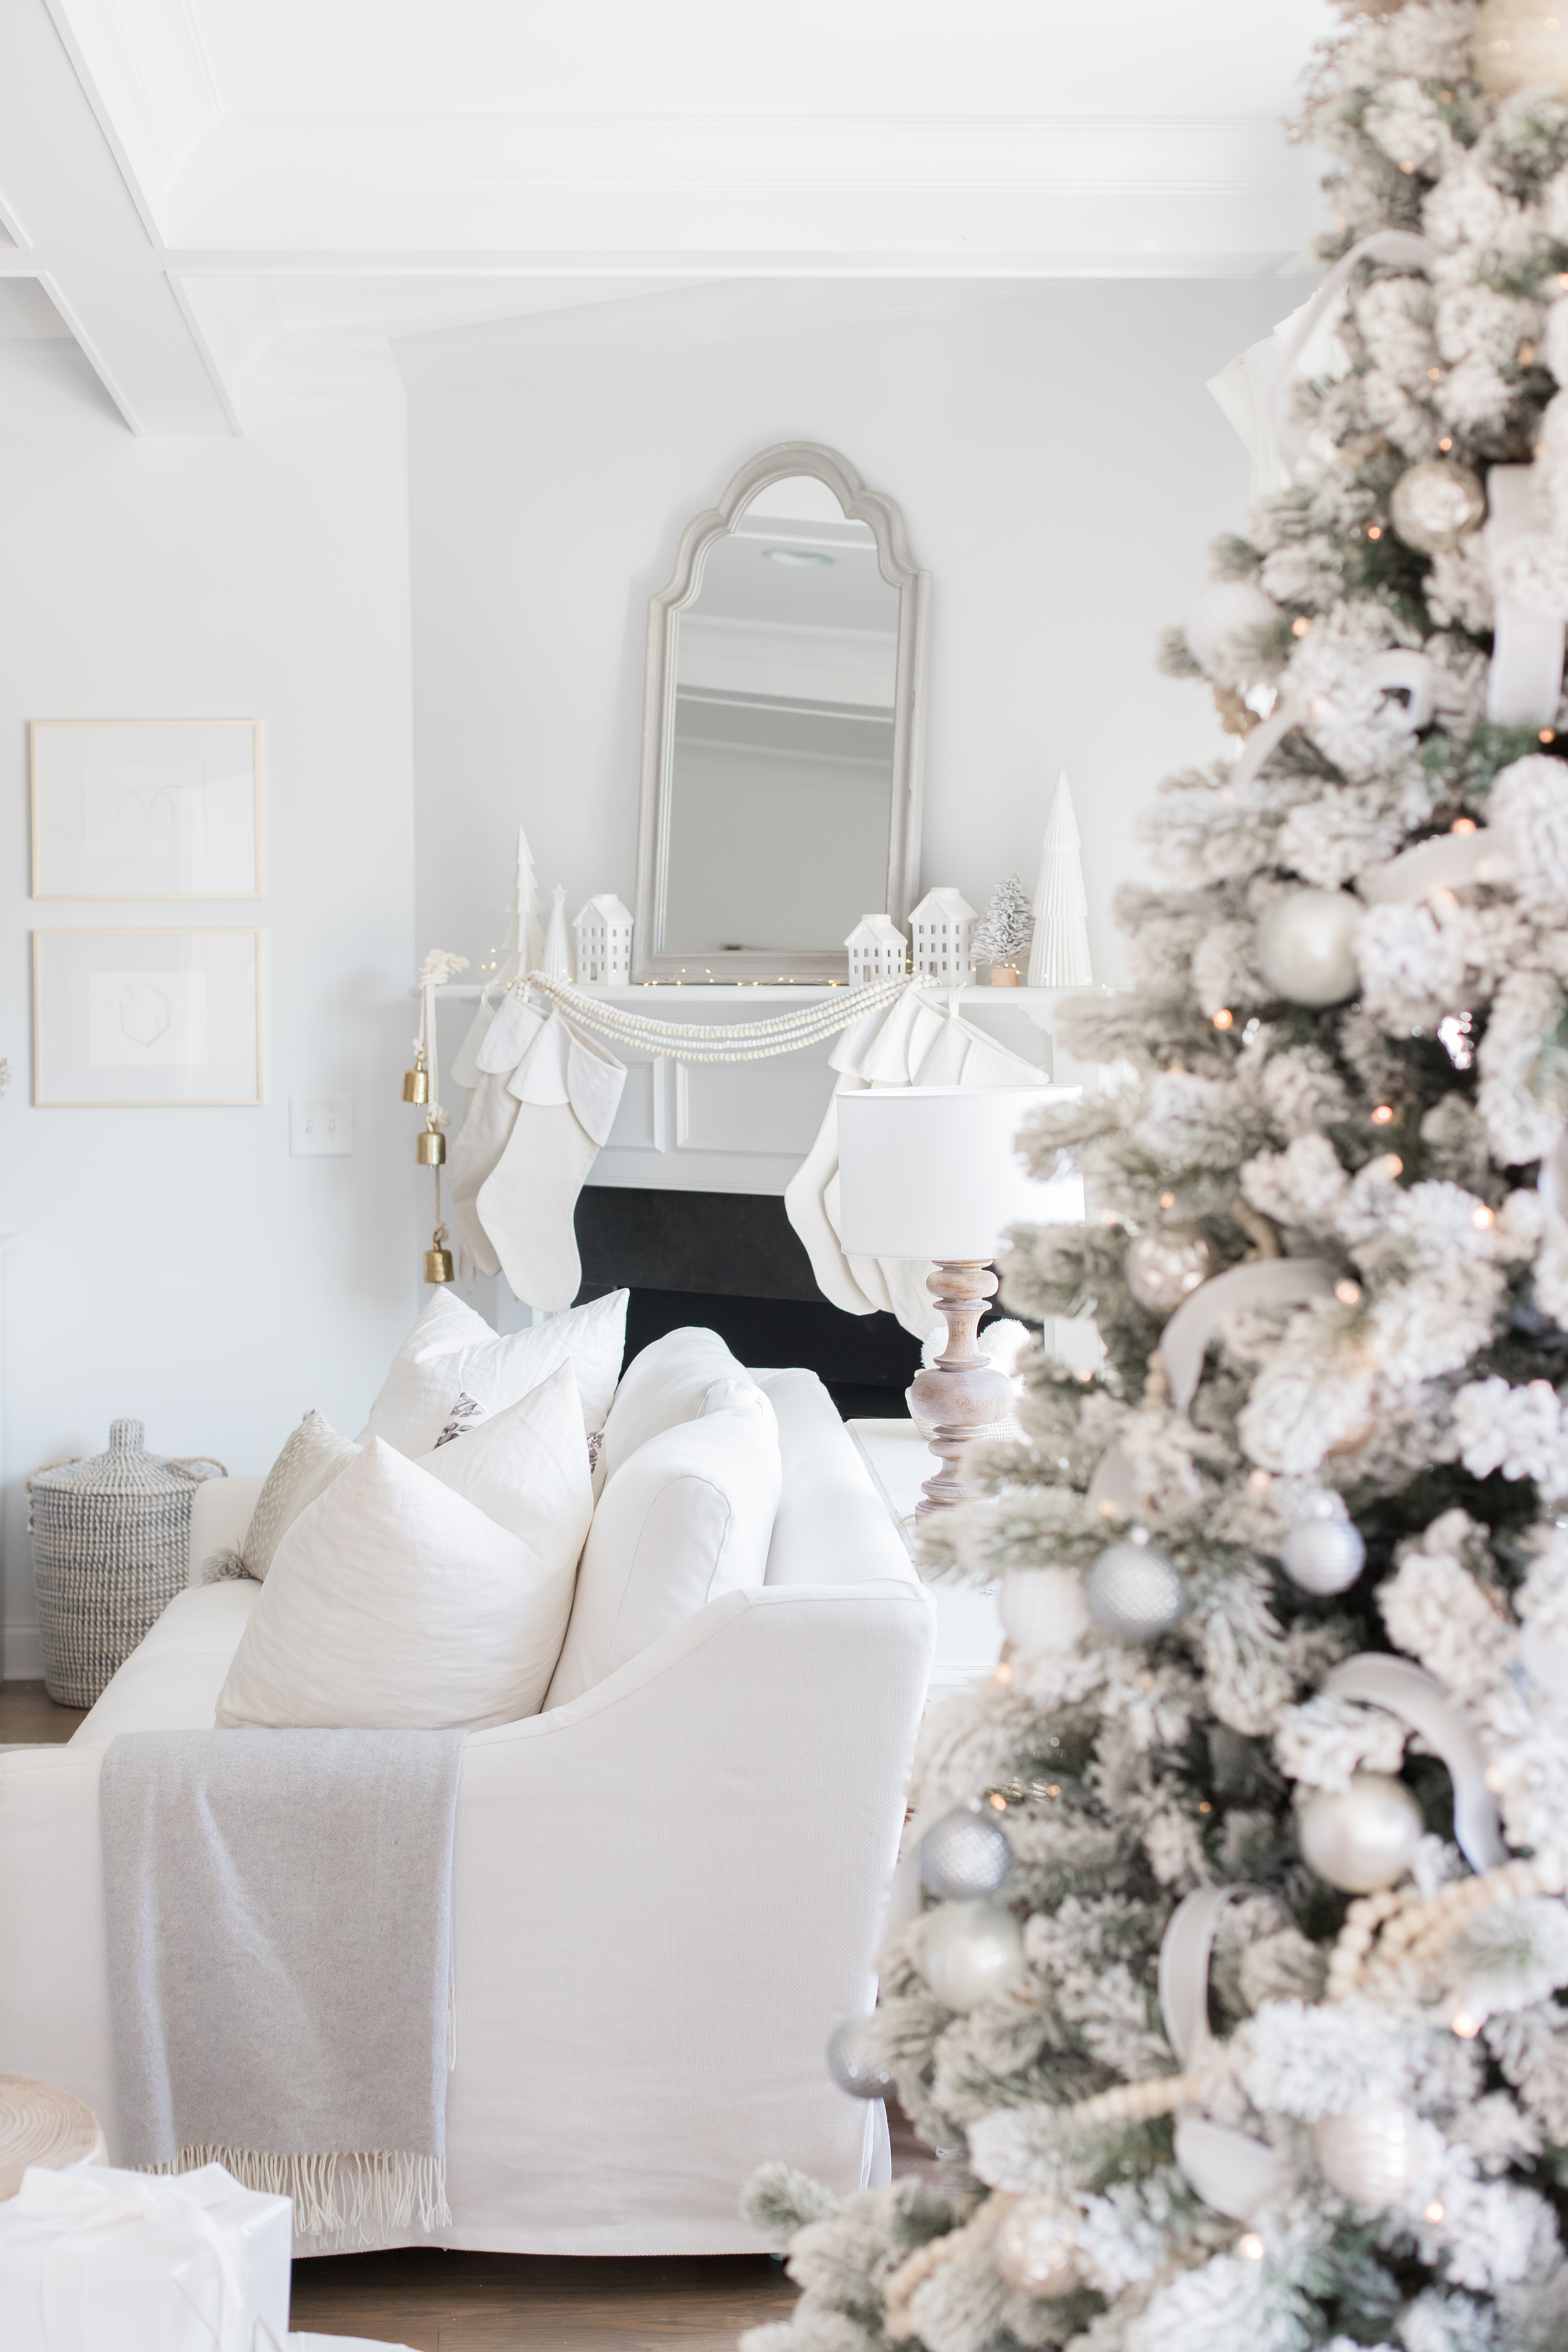 Love this Neutral Christmas Living Room decor. White couches and wood coffee table are beautiful. | AE HOME STYLE LIFE | #christmasdecor #whitechristmasdecor #woodchristmasdecor #whitechristmas #neutralchristmasdecor #christmasmantle #mantledecor #flockedchristmastree #flockedtreedecor #whitecouch 